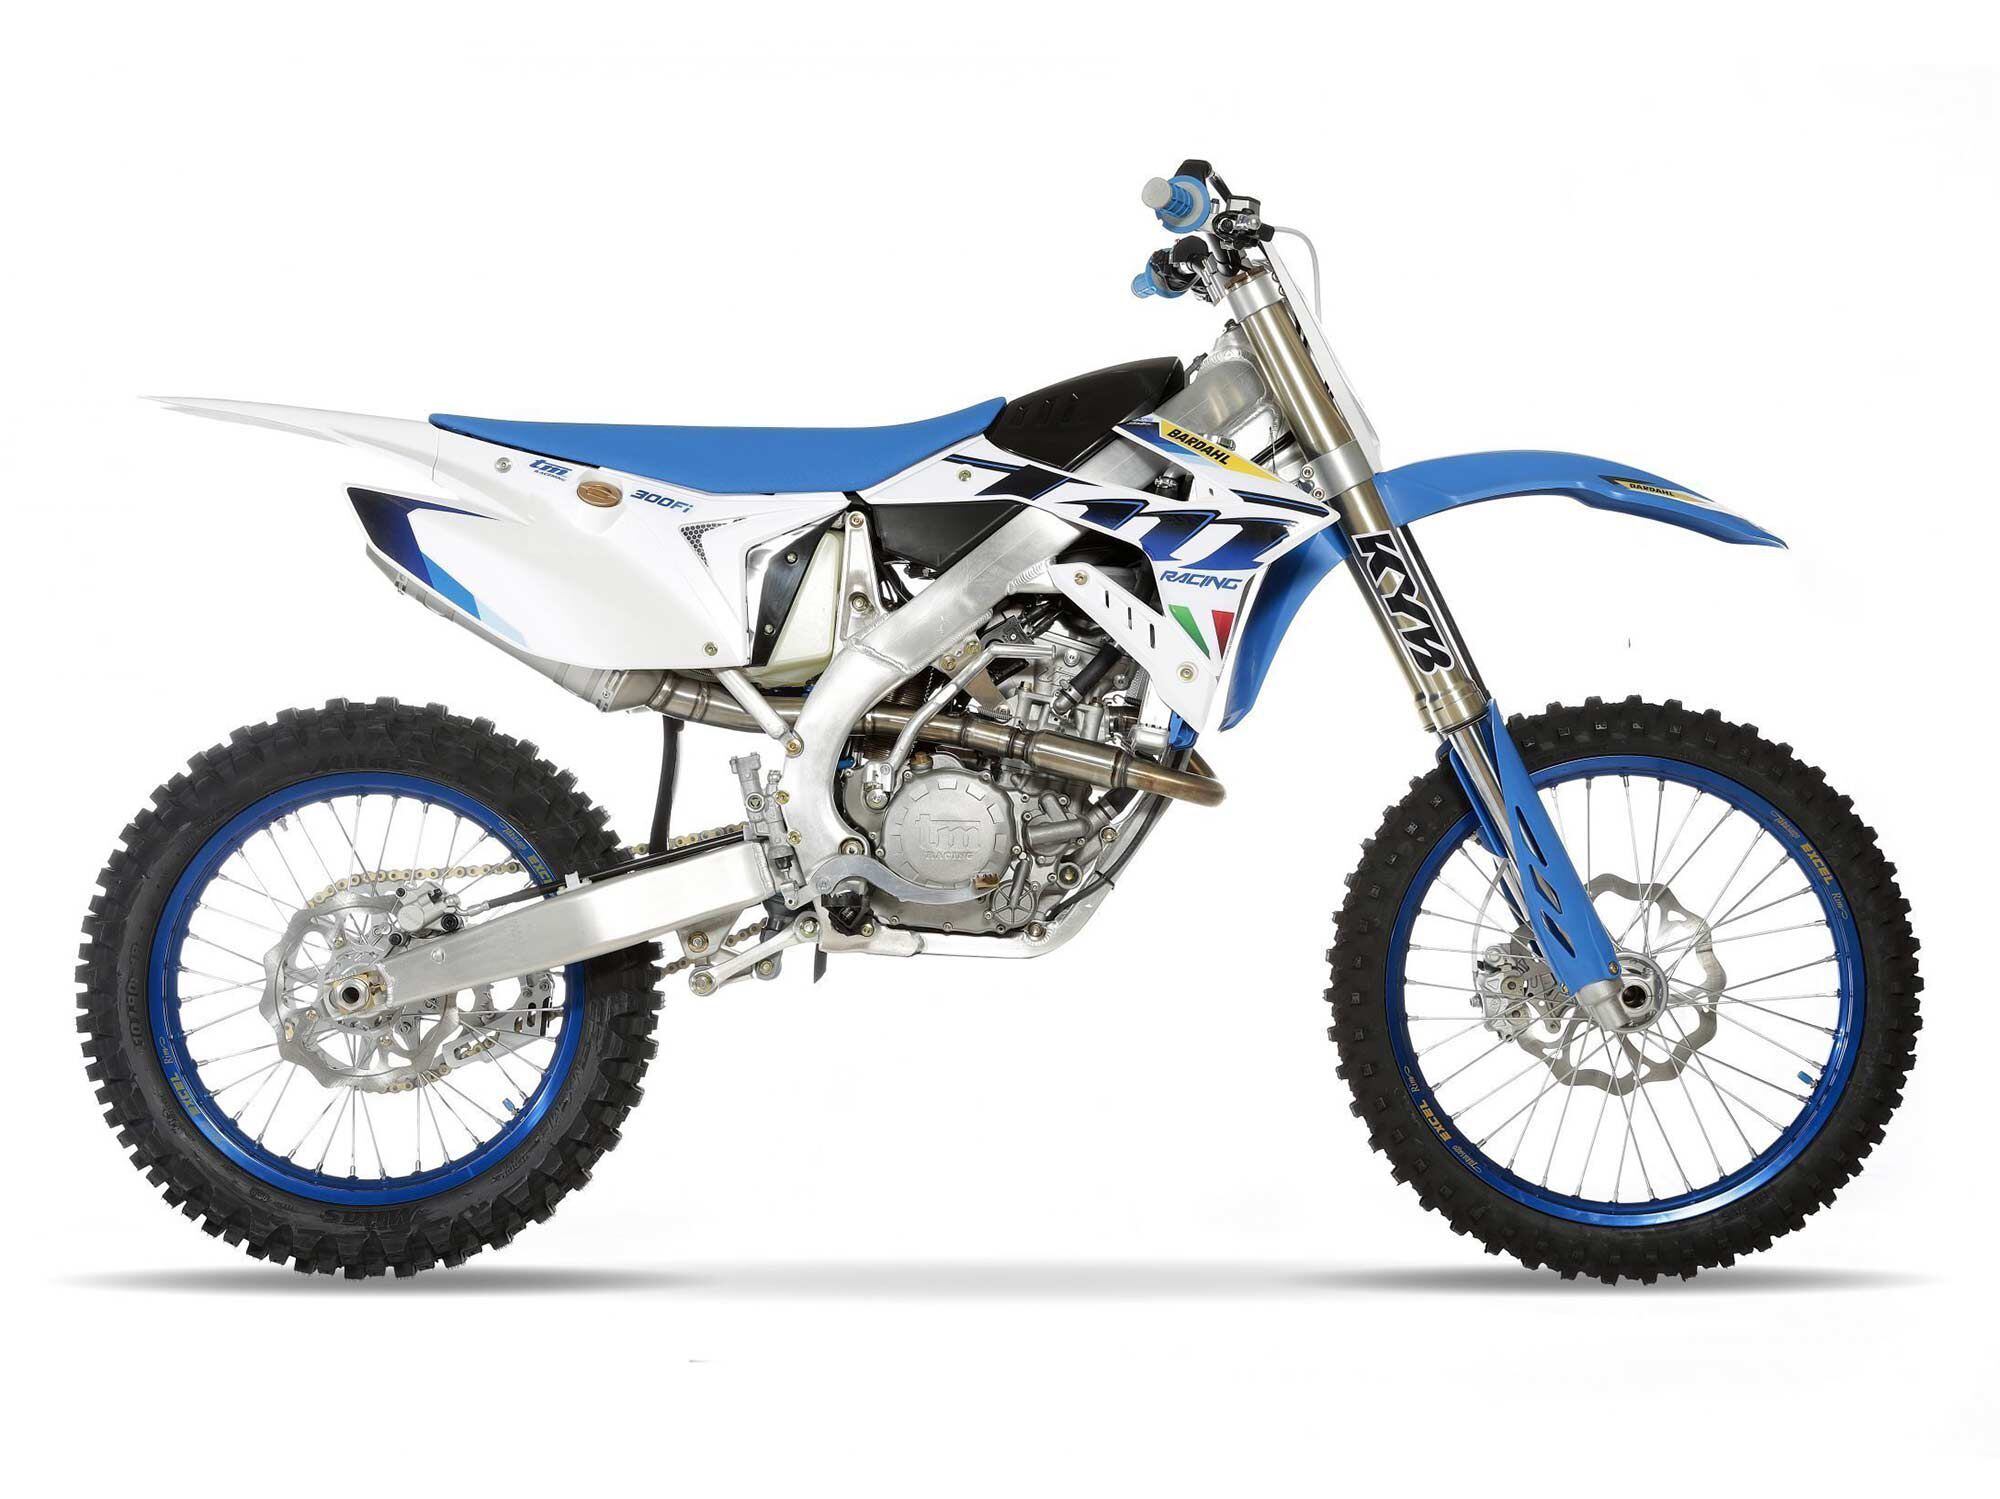 Searching for an exotic motocrosser with a unique engine displacement? Look no further than the TM MX 300 Fi.